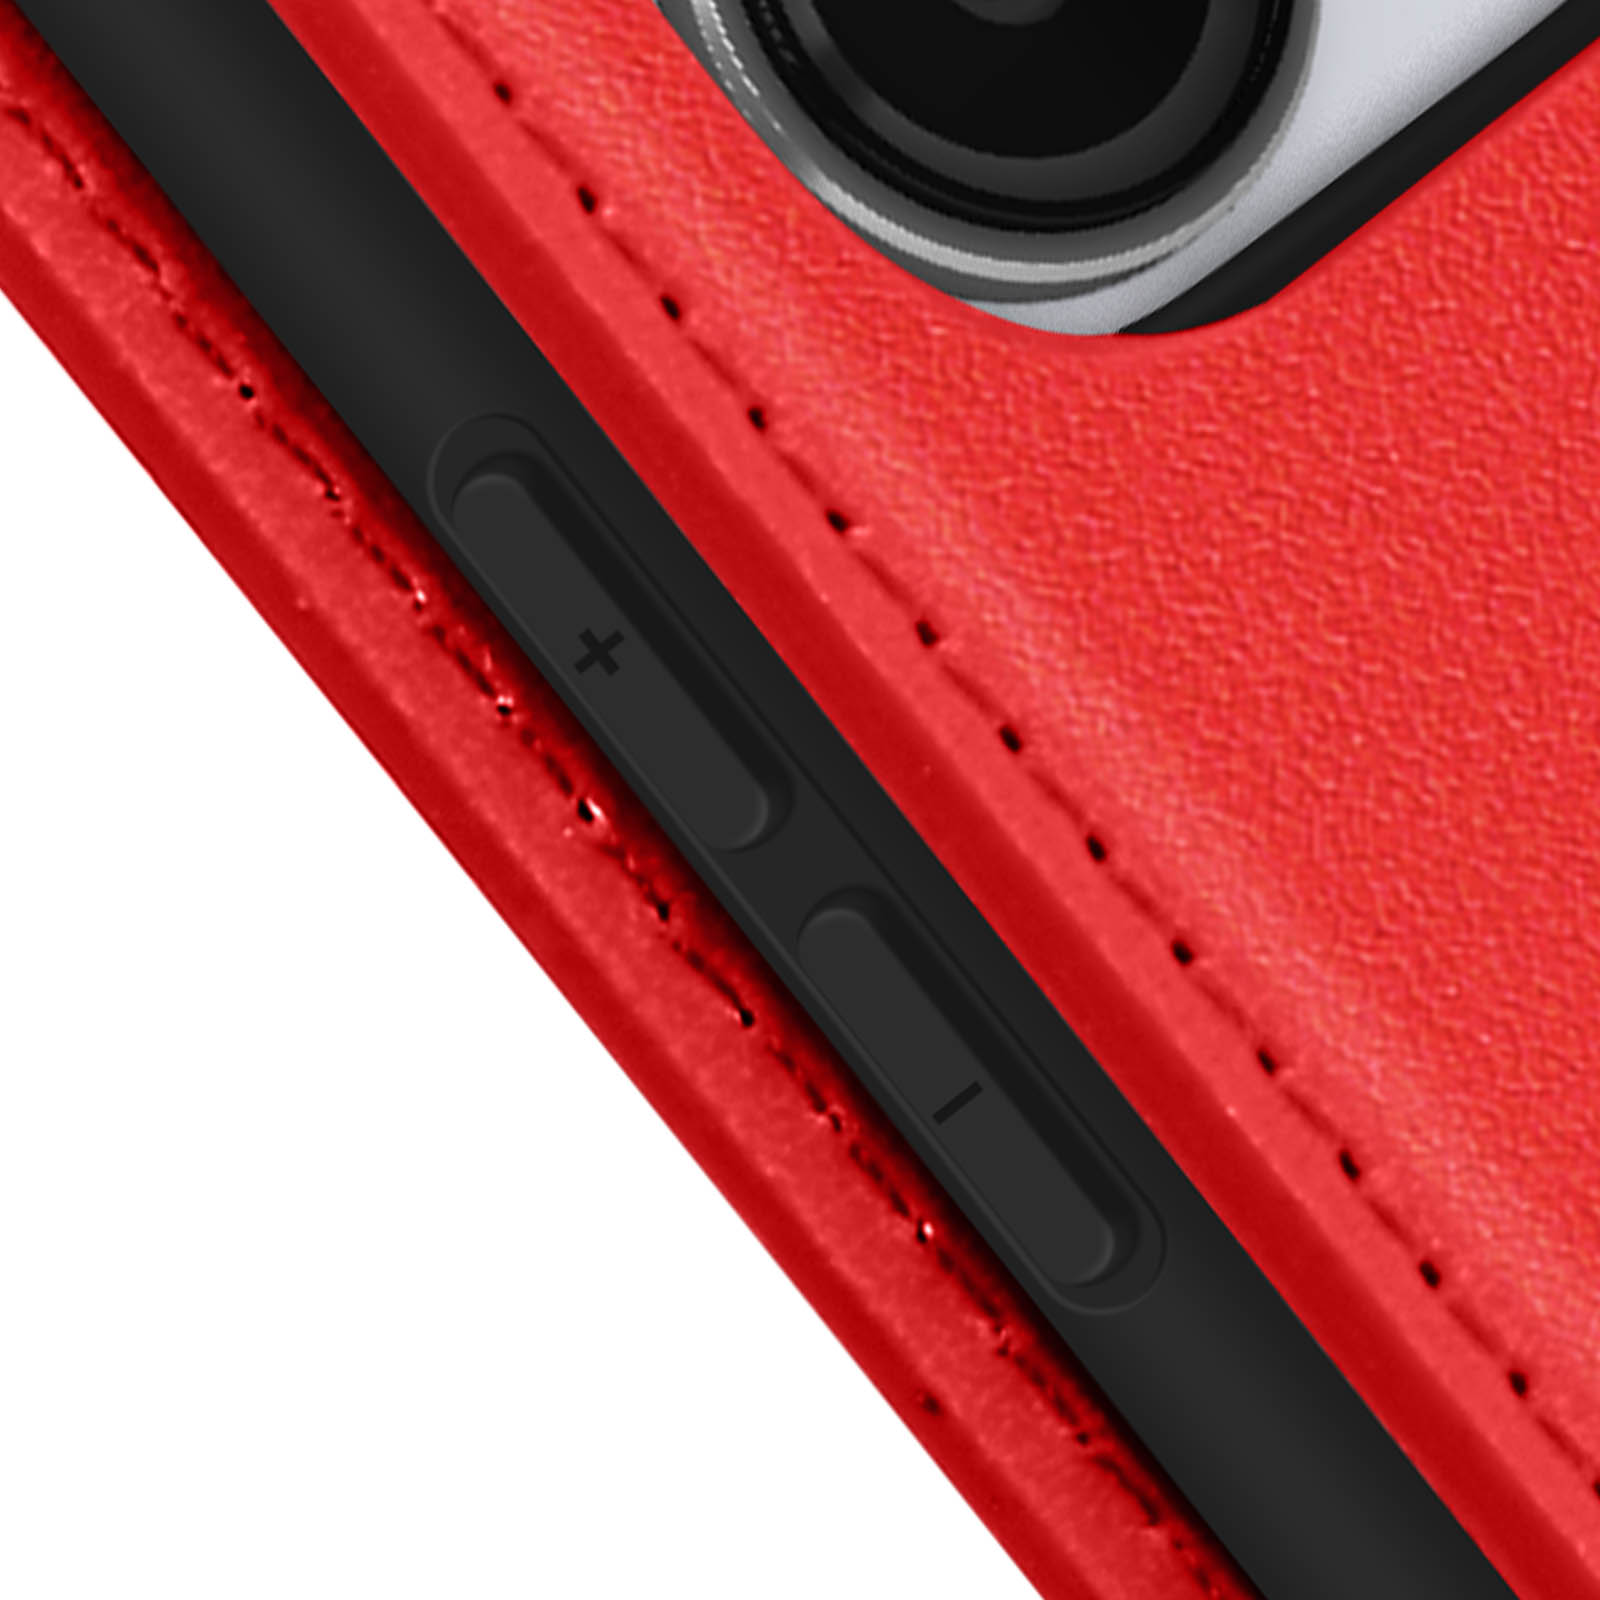 AVIZAR Classic Edition, Xiaomi, Bookcover, 9S, Magnetklappe Backcover Redmi Note Series, mit Rot